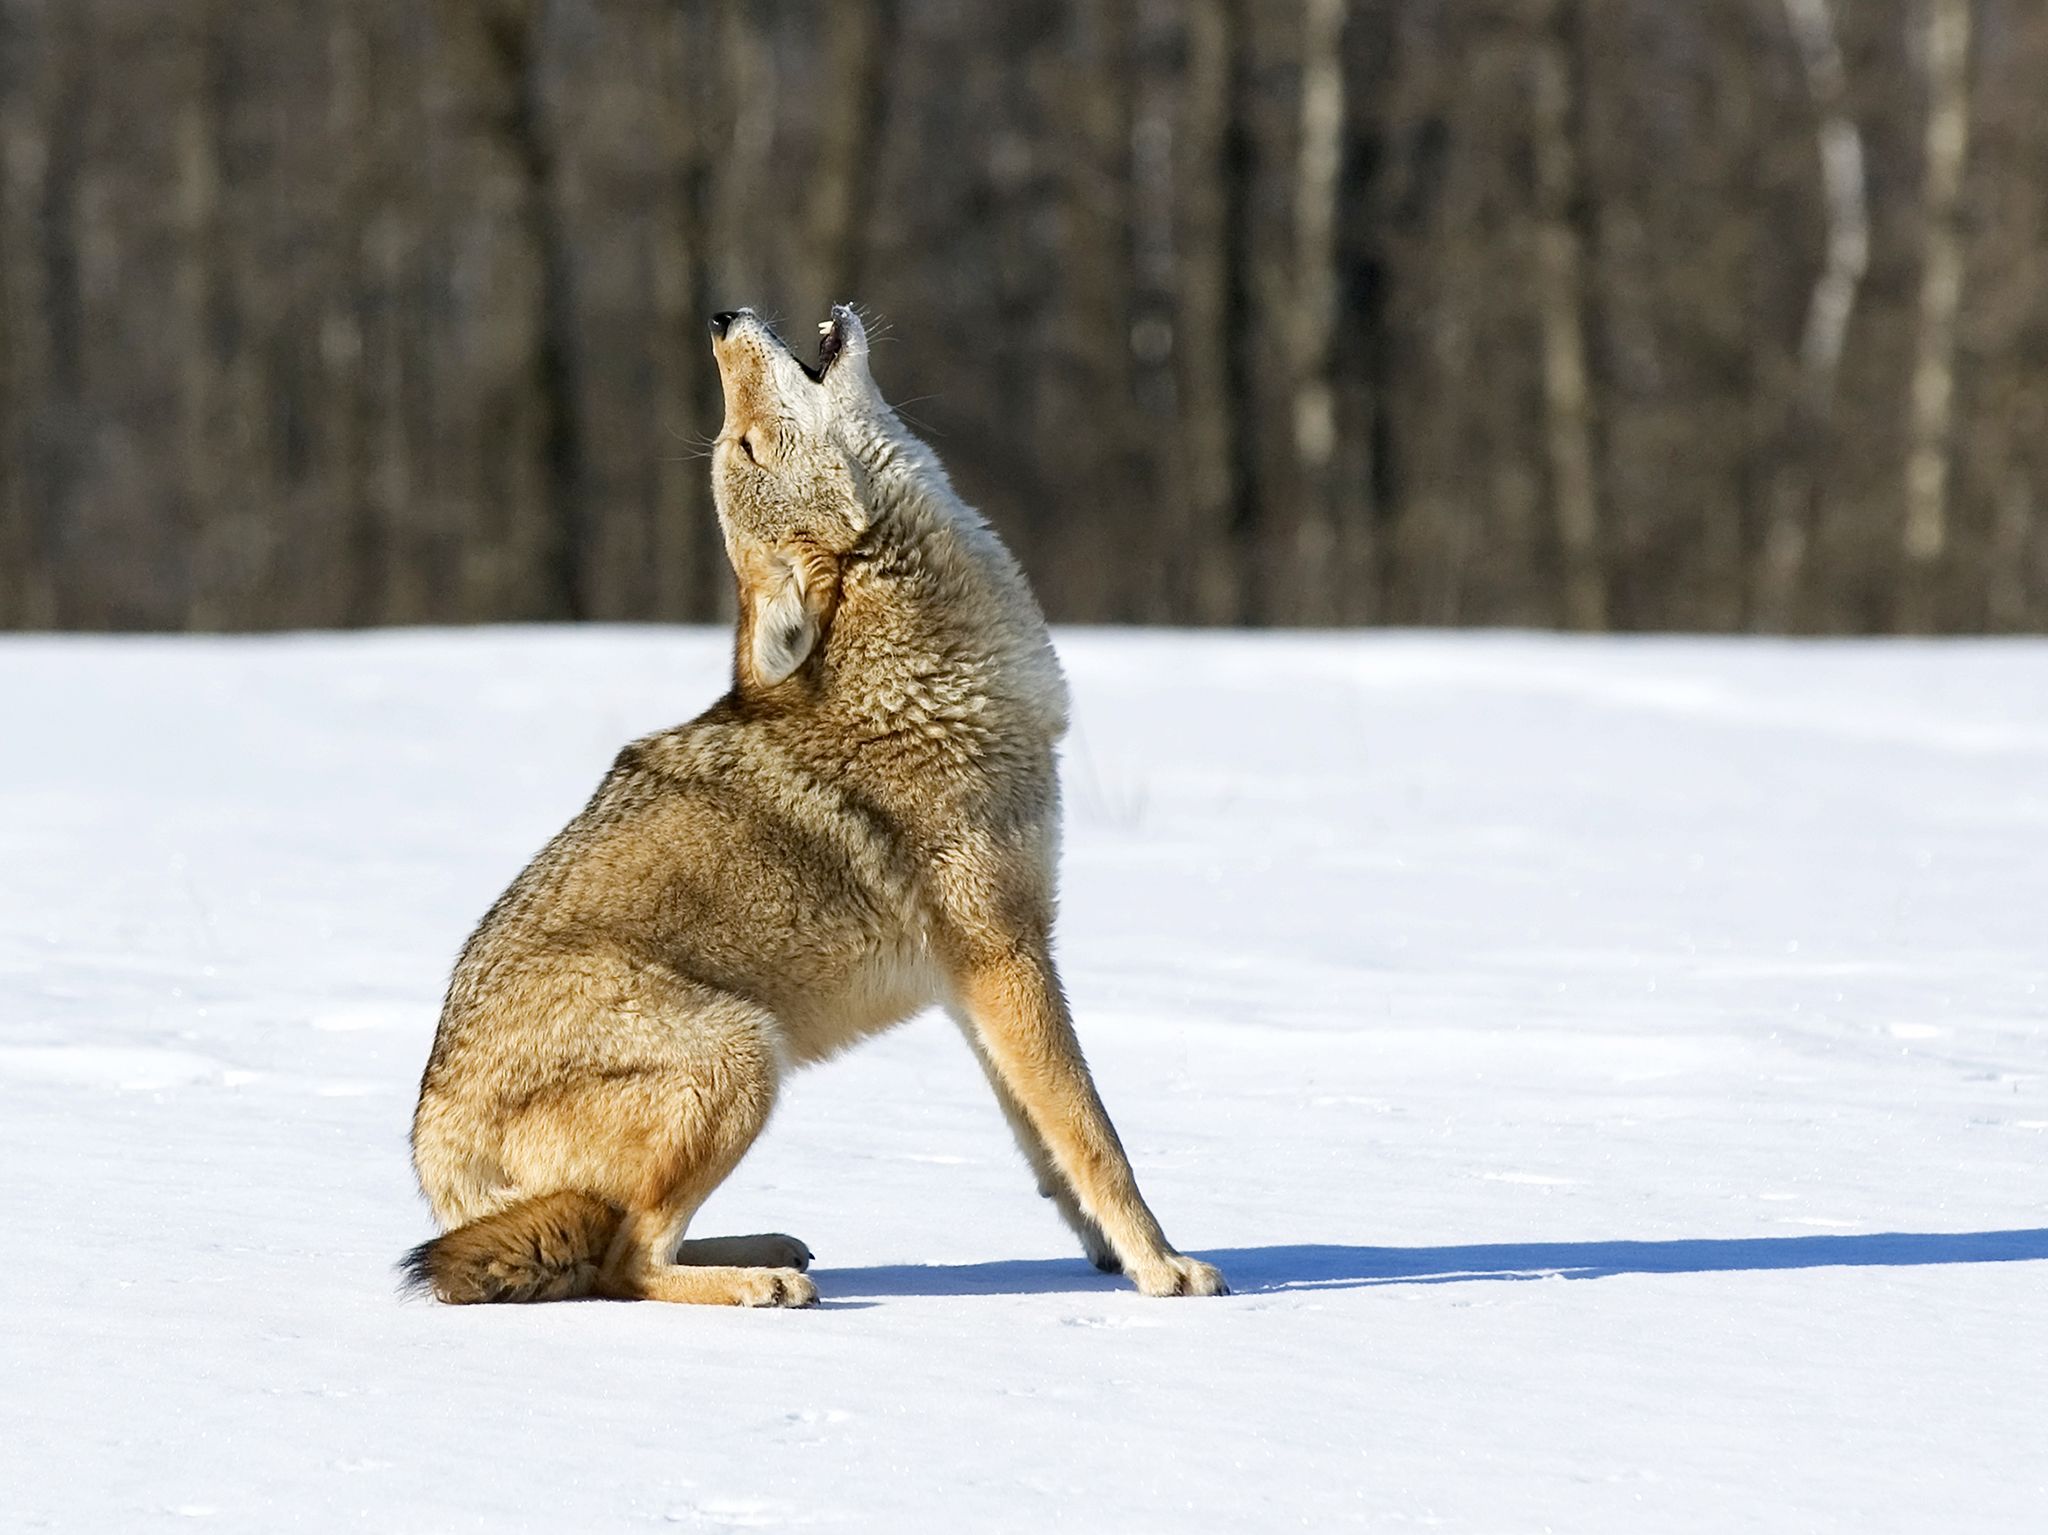 A coyote howls. The coyote's vocalizations are one of the few wild animals commonly heard; the... [Photo of the day - مارس 2020]